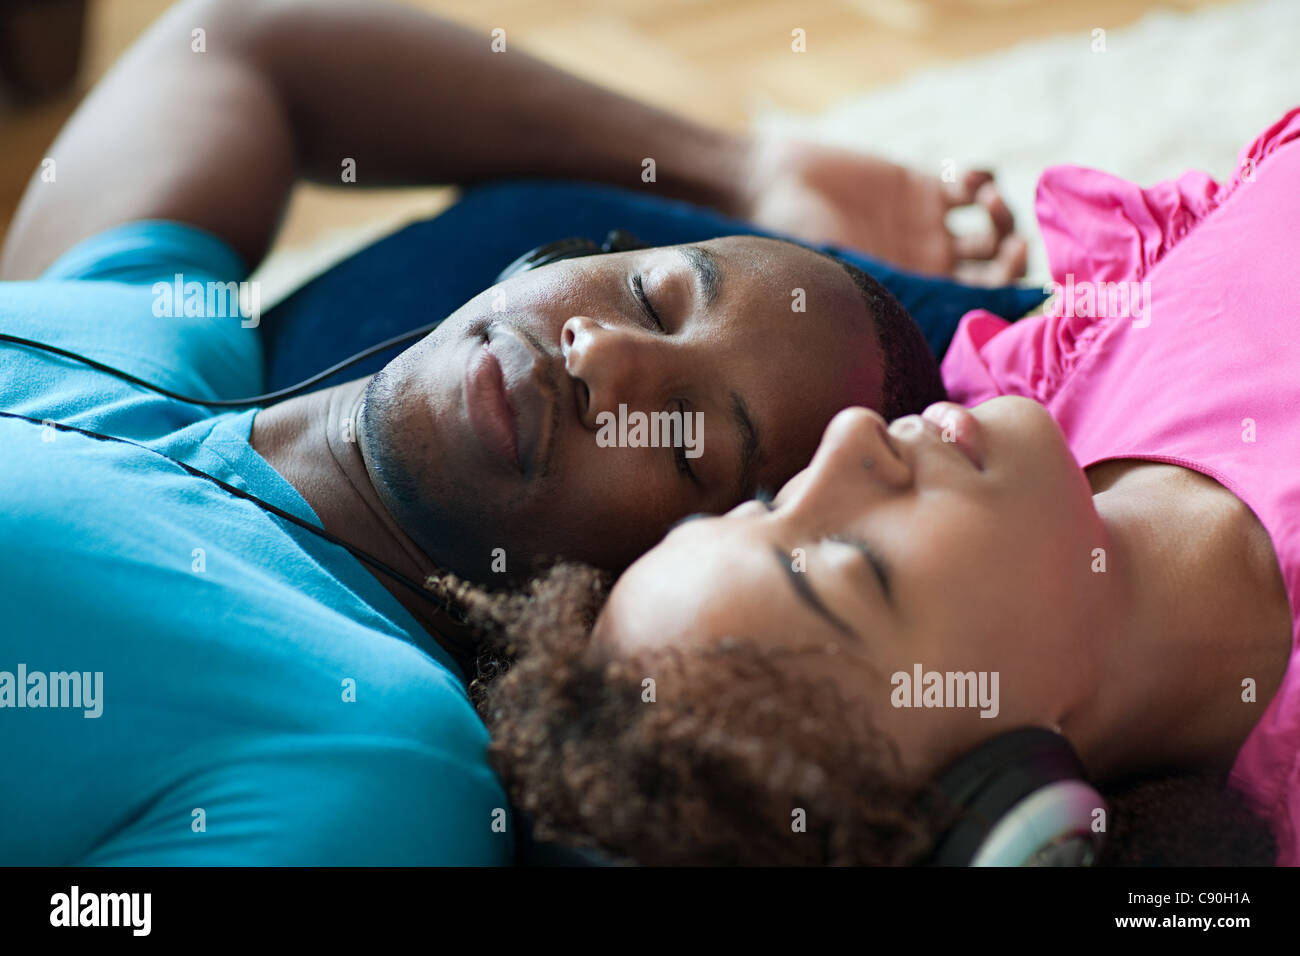 Man and woman listening to music, eyes closed Stock Photo